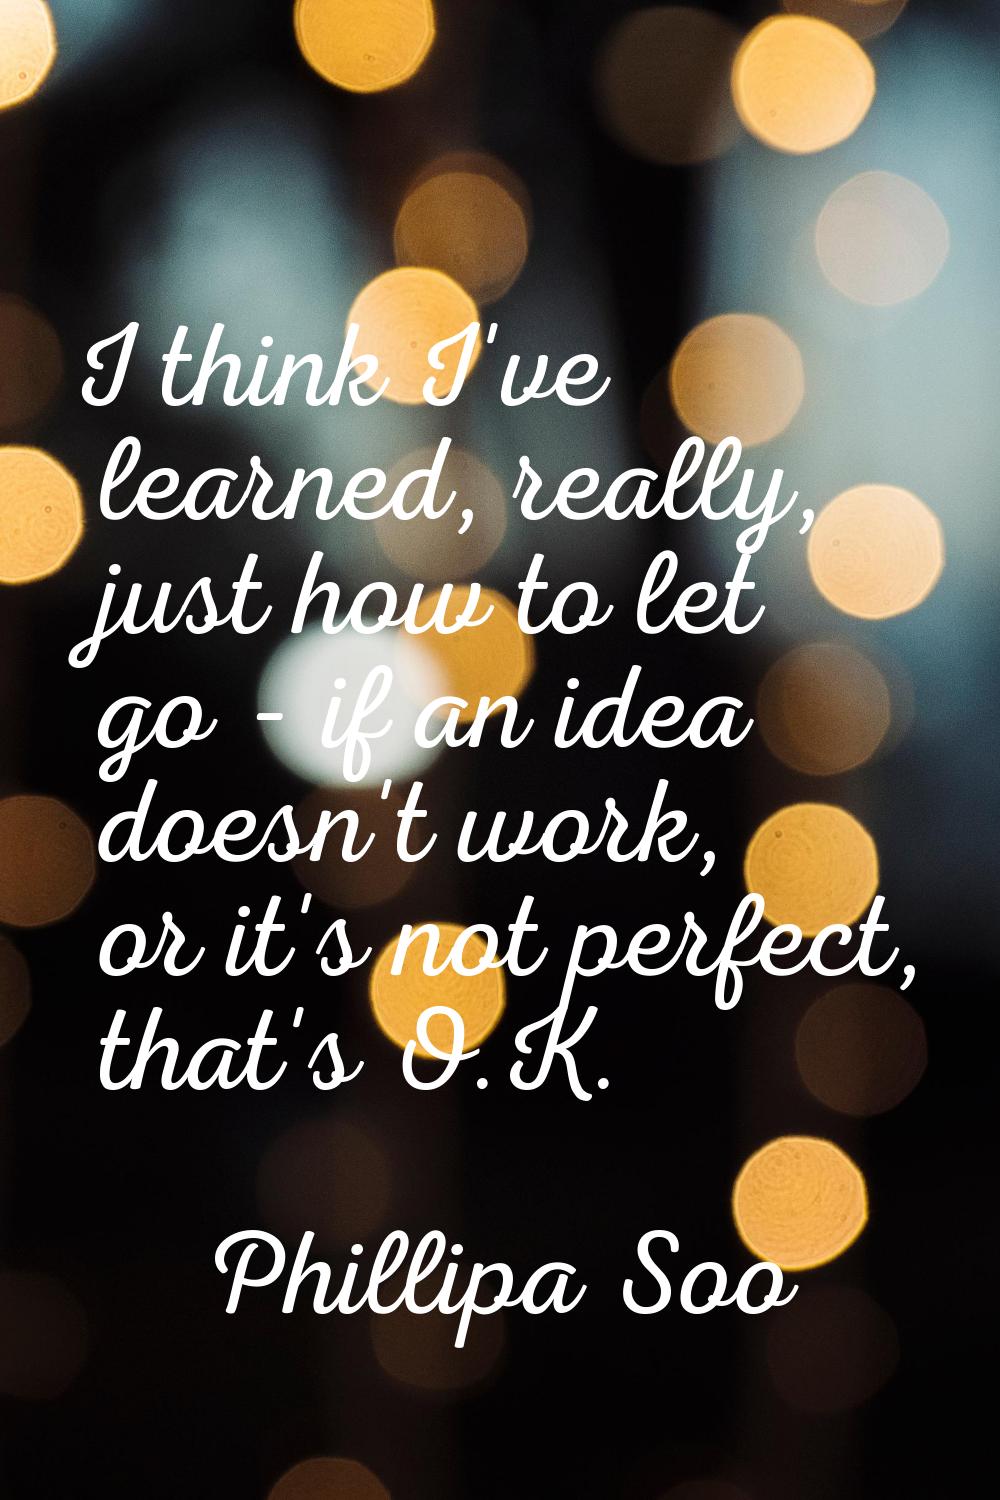 I think I've learned, really, just how to let go - if an idea doesn't work, or it's not perfect, th